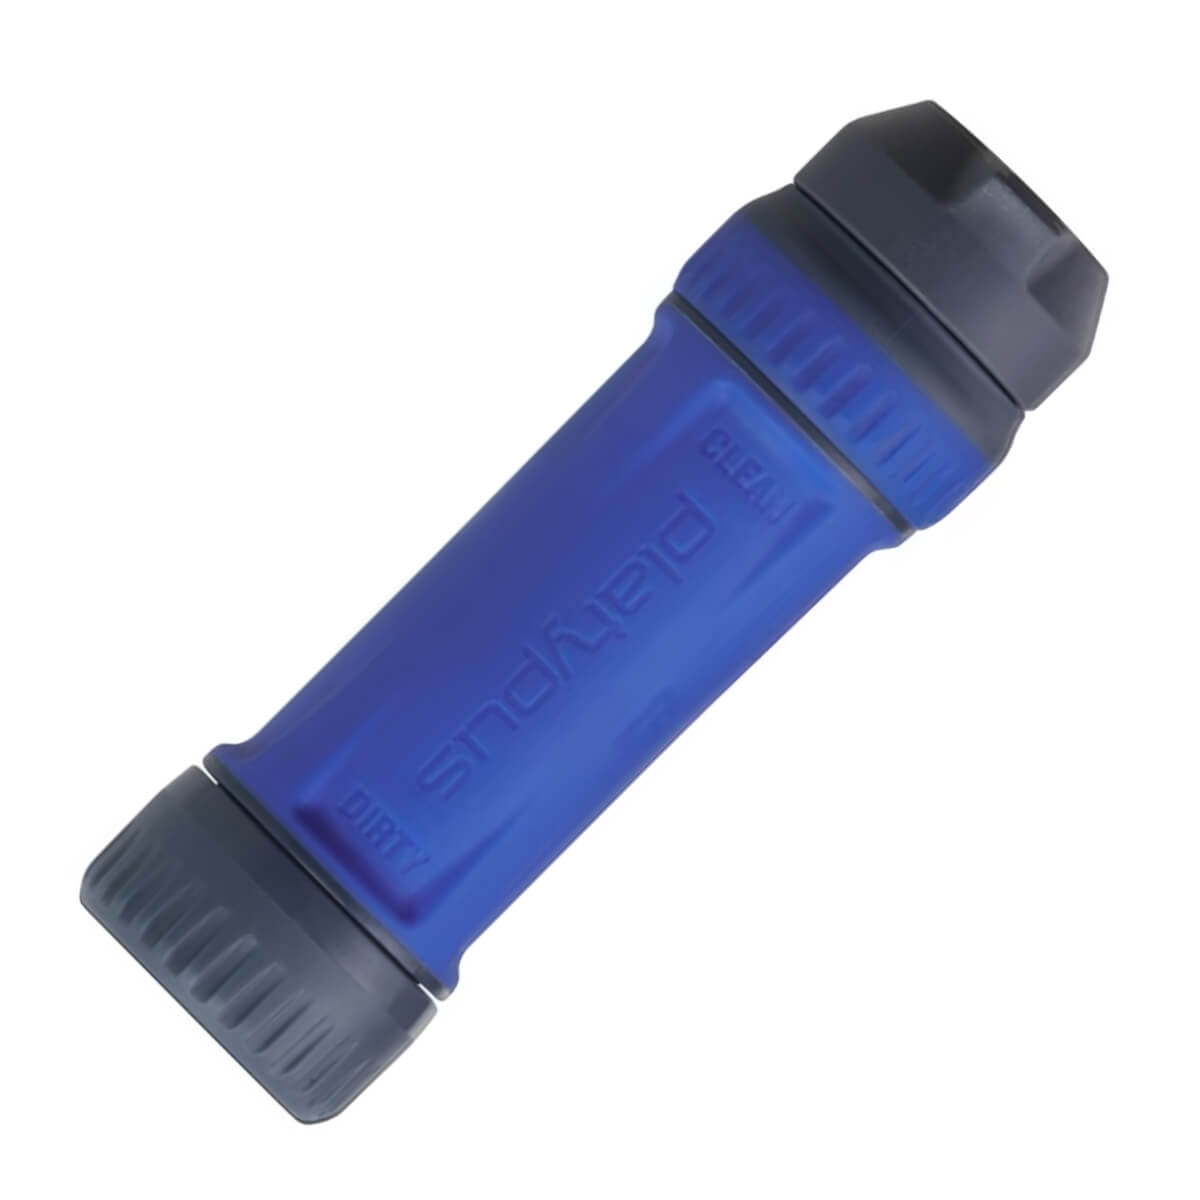 Platypus Quickdraw backpacking water filter